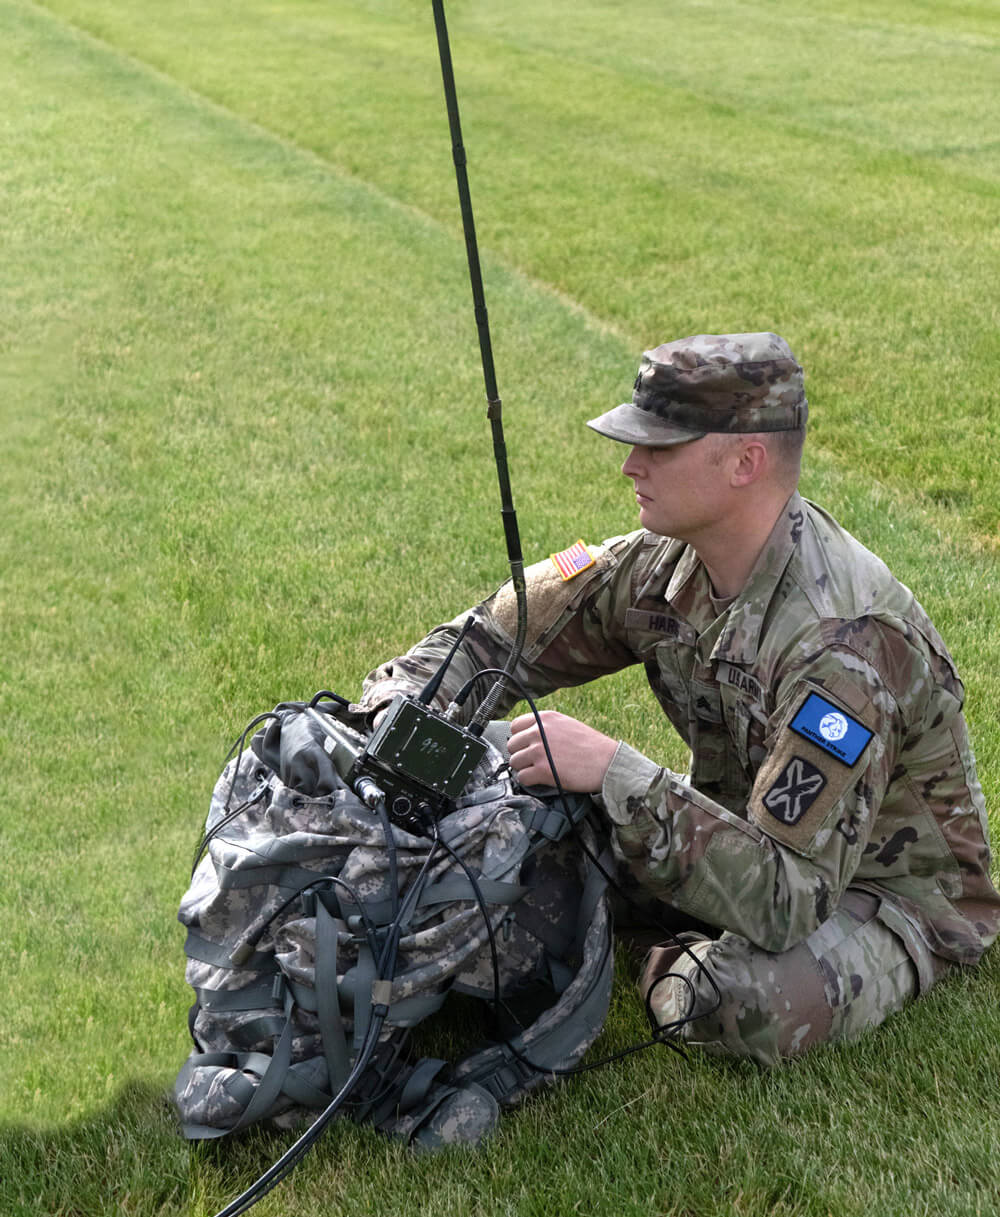 SGT Christopher Harris with B Company, 223rd Military Intelligence Battalion, 300th Military Intelligence Brigade, California Army National Guard, operates a radio as part of a training mission during the 2019 iteration of Panther Strike 2019. Utah Army National Guard photo by SGT Nathan Baker